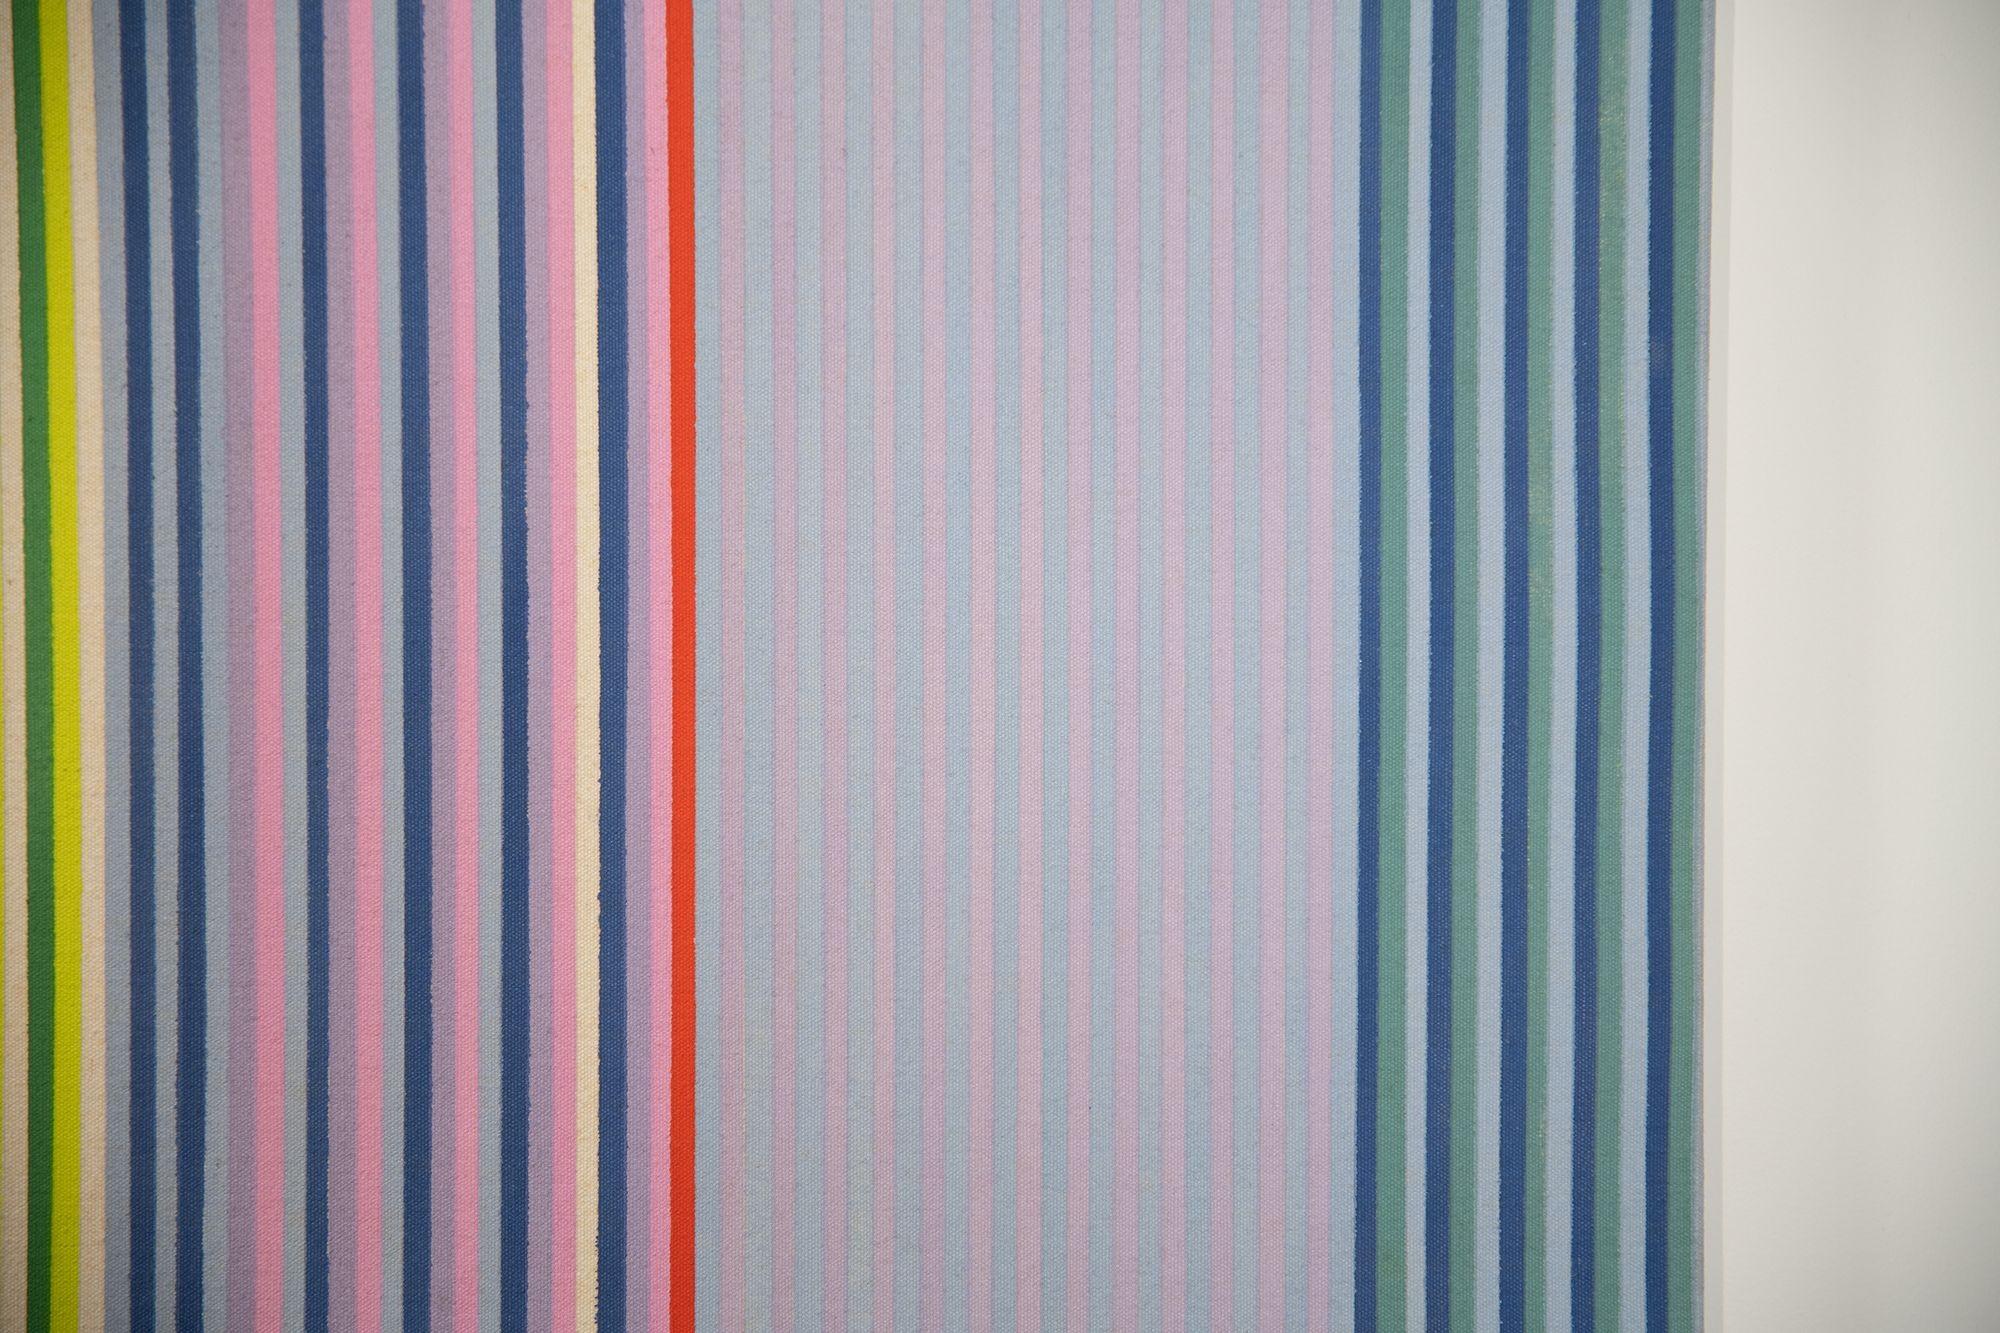 Monumentally scaled, abstract, hard-edge painting with vertical stripes by world-renowned American color field painter Gene Davis. 
Titled King's Bedchamber and executed in 1971. Part of a prestigious private Texas Collection. 
Full Provenance will